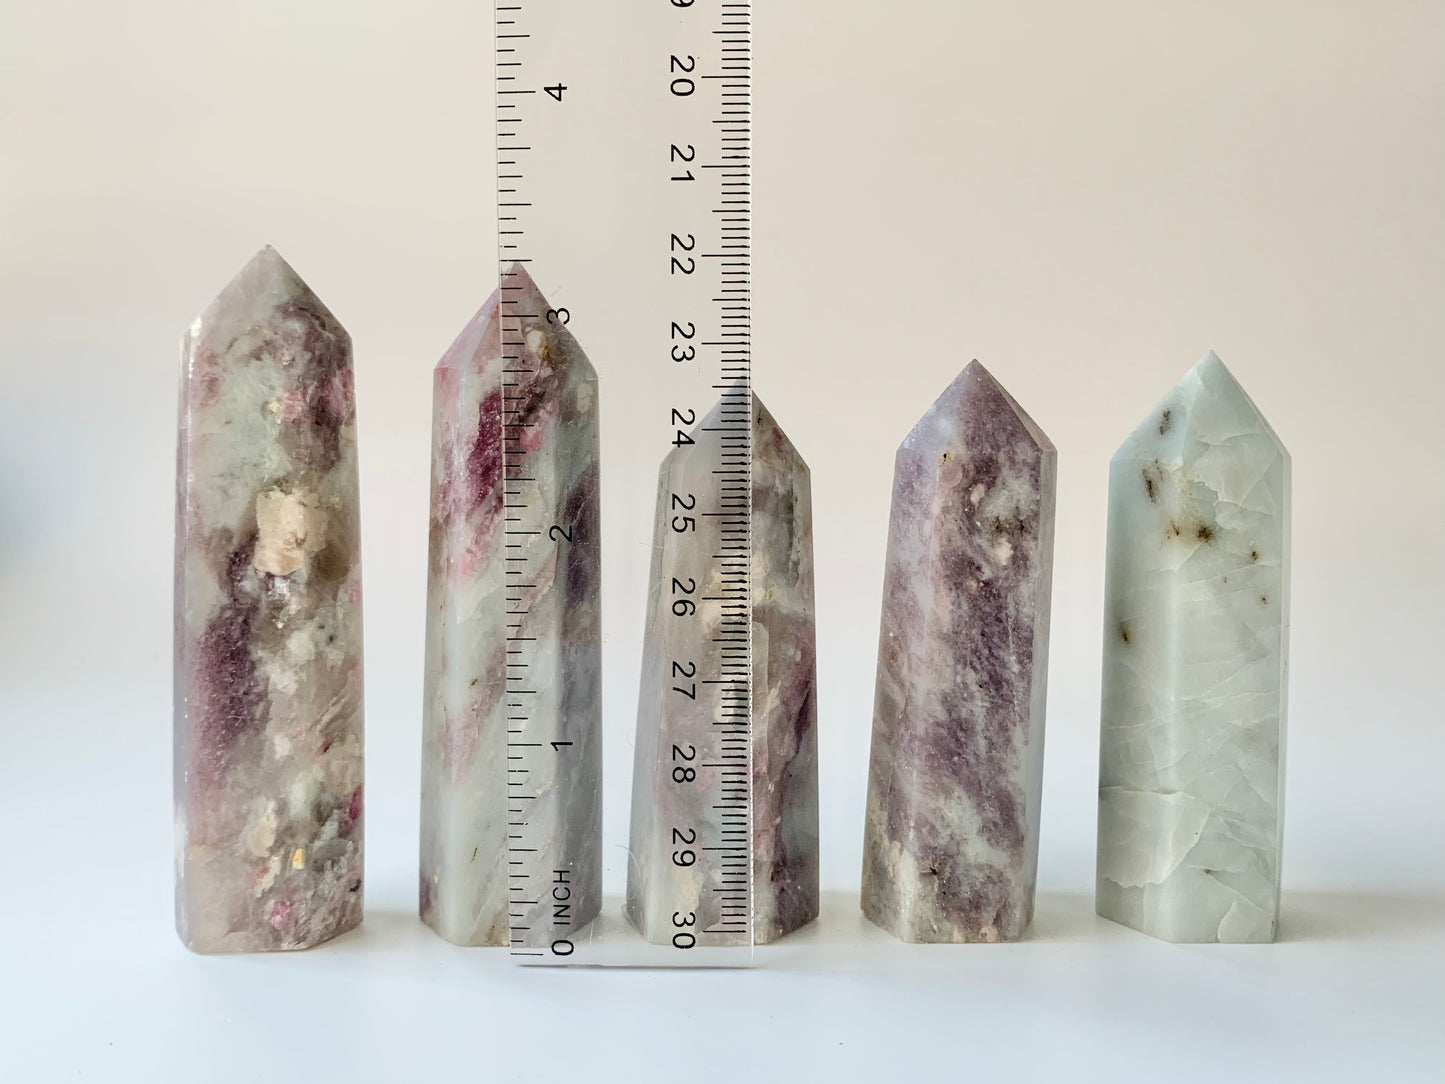 Pink Tourmaline and Lepidolite Towers, $10